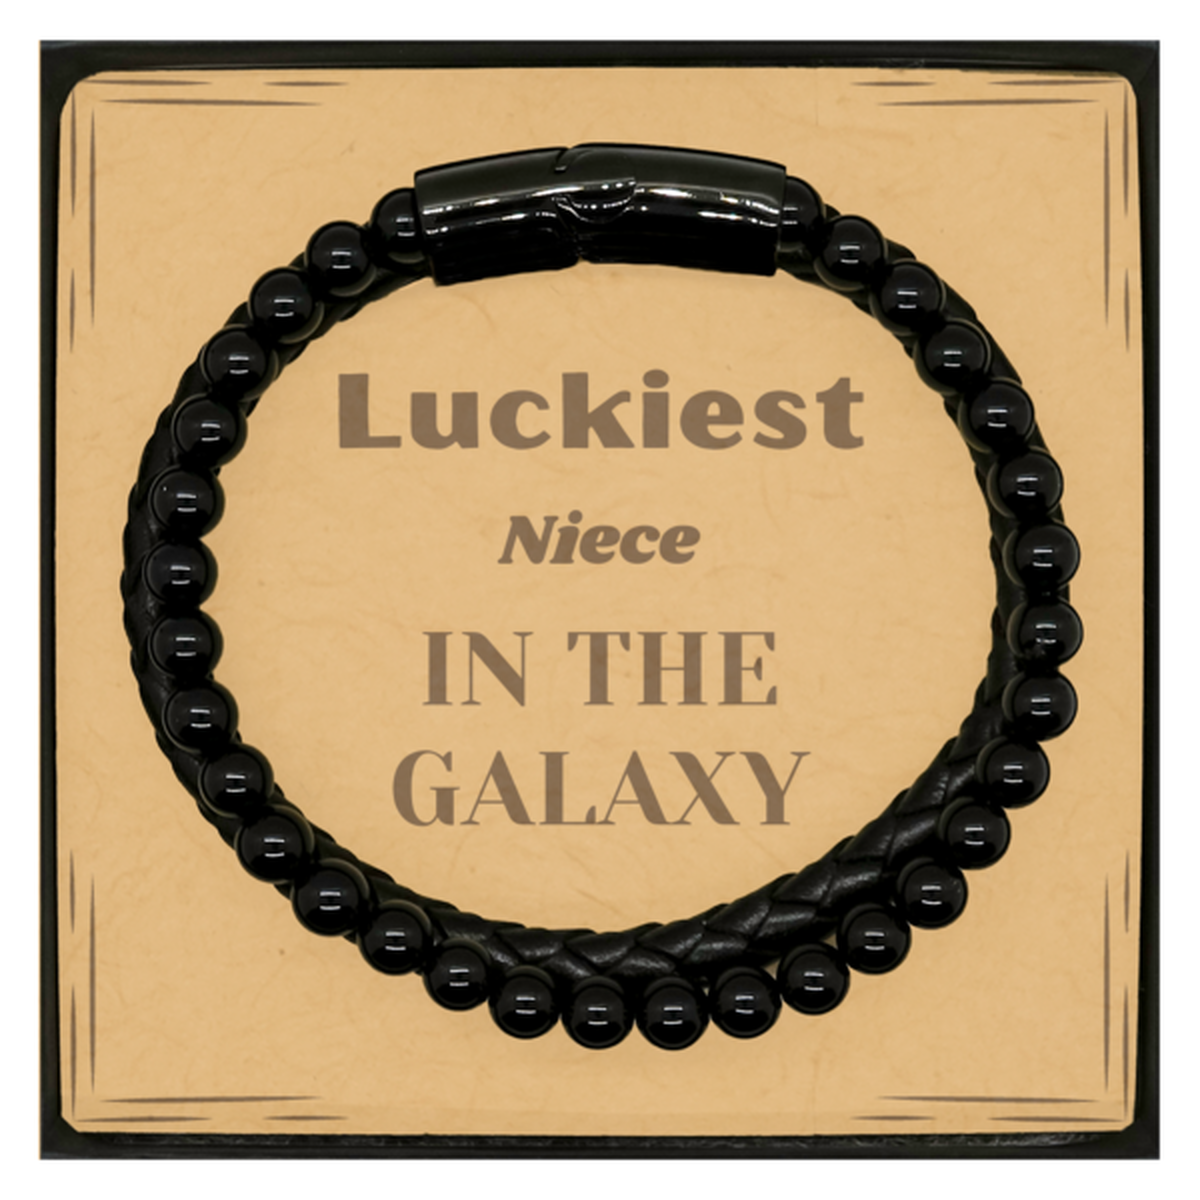 Luckiest Niece in the Galaxy, To My Niece Message Card Gifts, Christmas Niece Stone Leather Bracelets Gifts, X-mas Birthday Unique Gifts For Niece Men Women